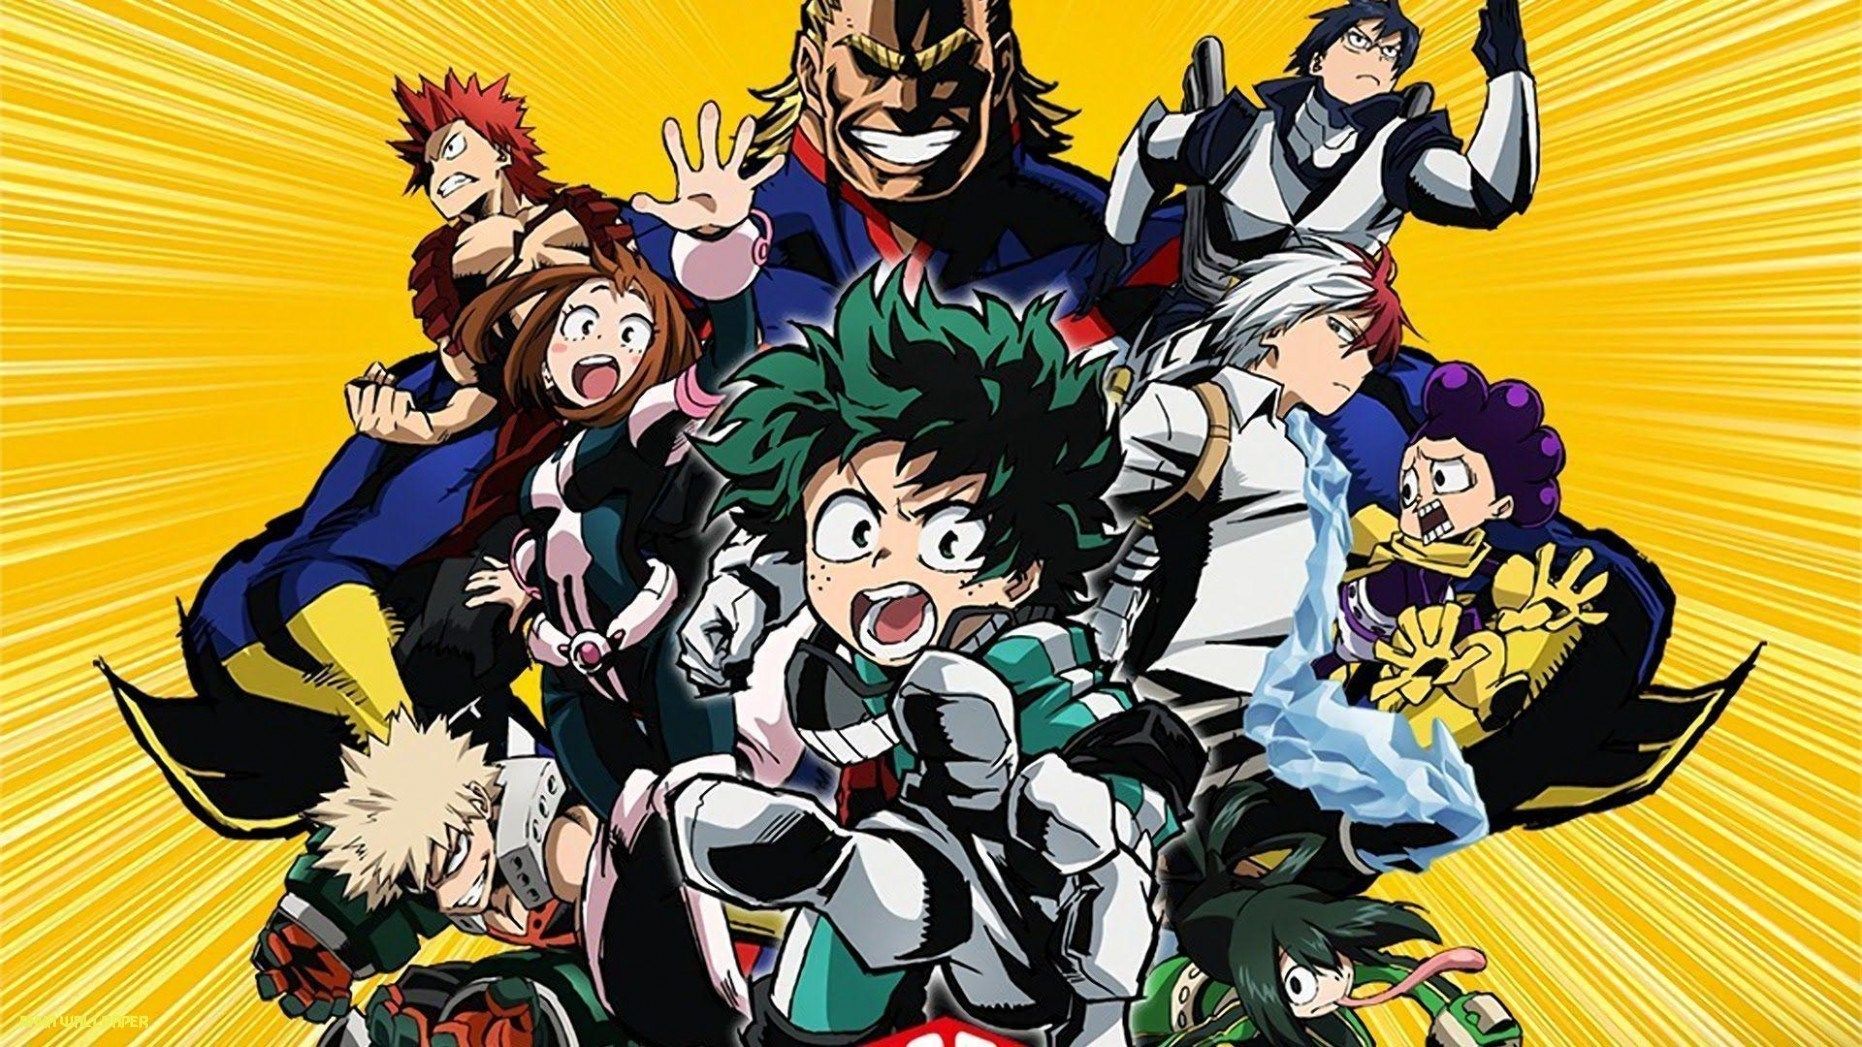 Ten Great Bnha Wallpaper Ideas That You Can Share With Your